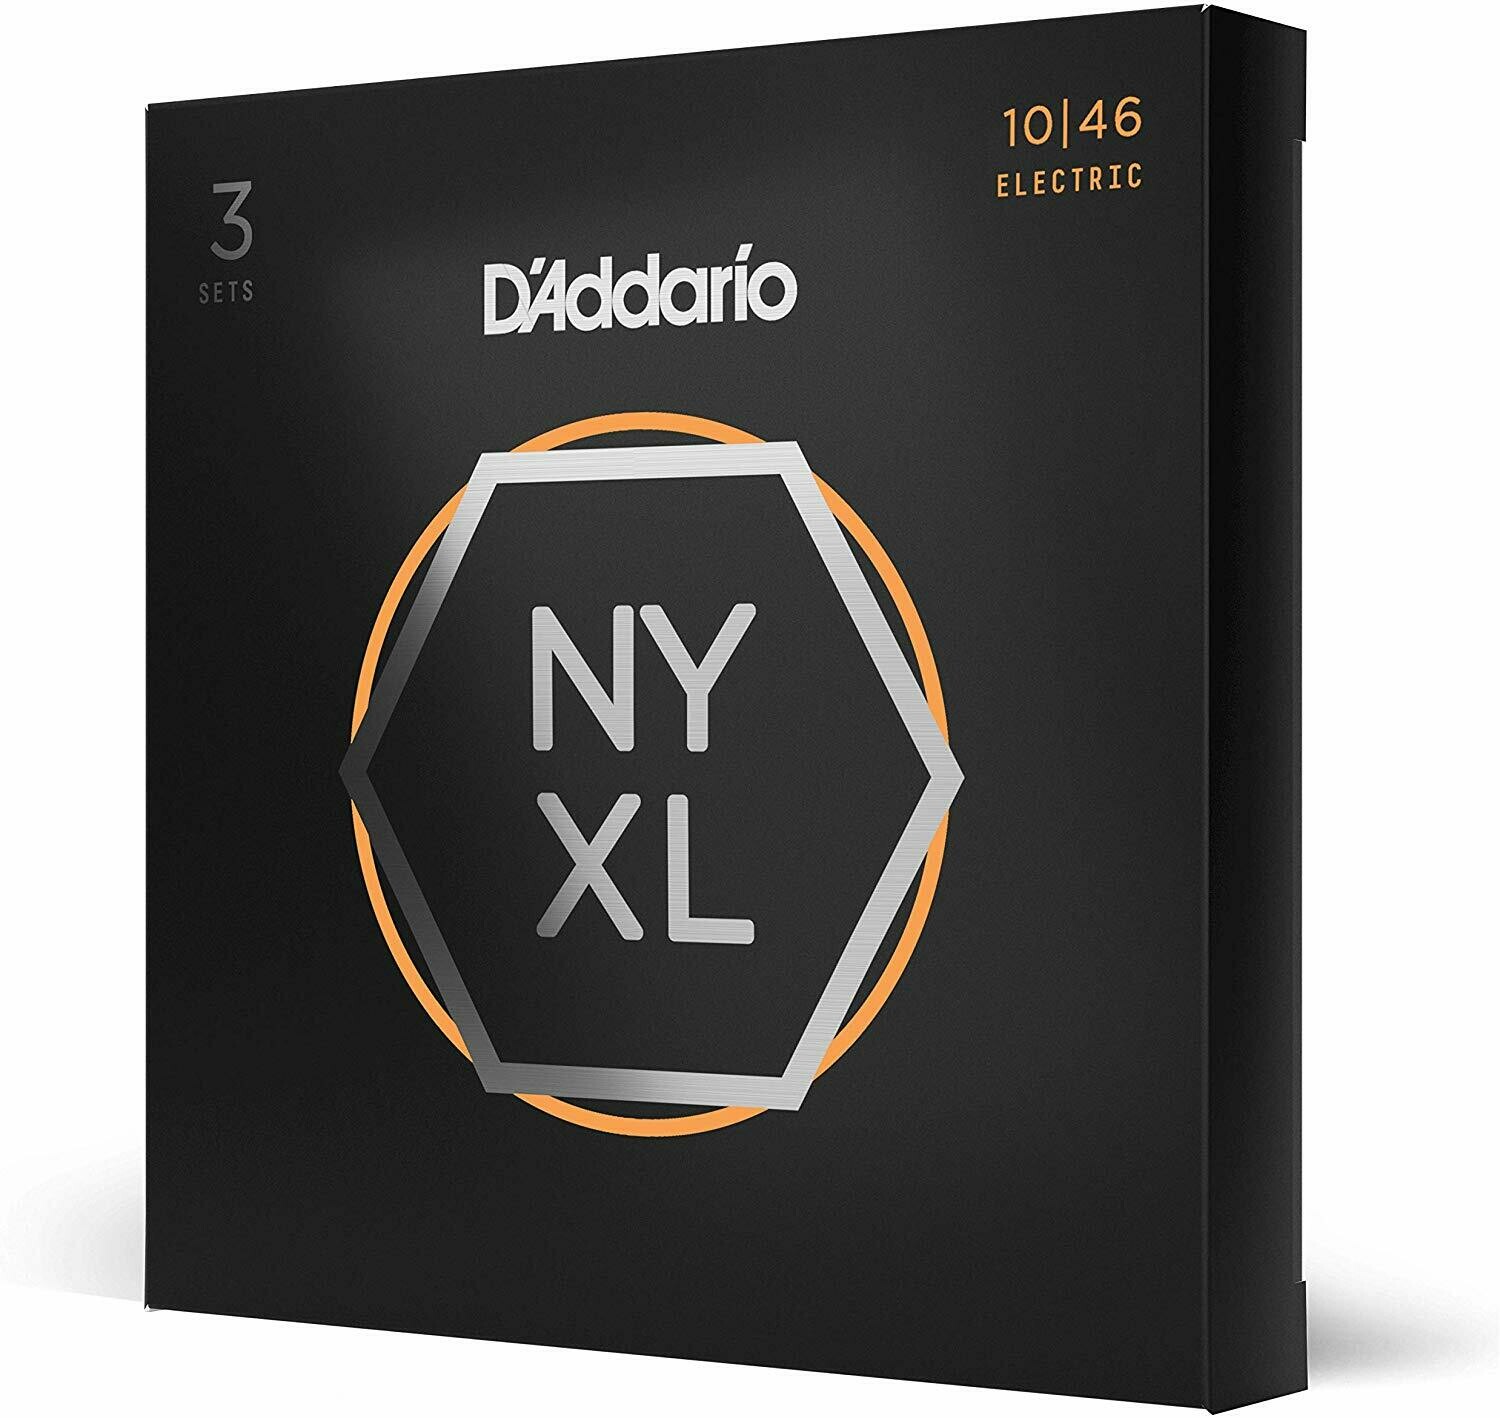 D’Addario NYXL1046-3P Nickel Plated Electric Guitar Strings, Regular Light,10-46 (3 Sets) – High Carbon Steel Alloy for Unprecedented Strength – Ideal Combination of Playability and Electric Tone